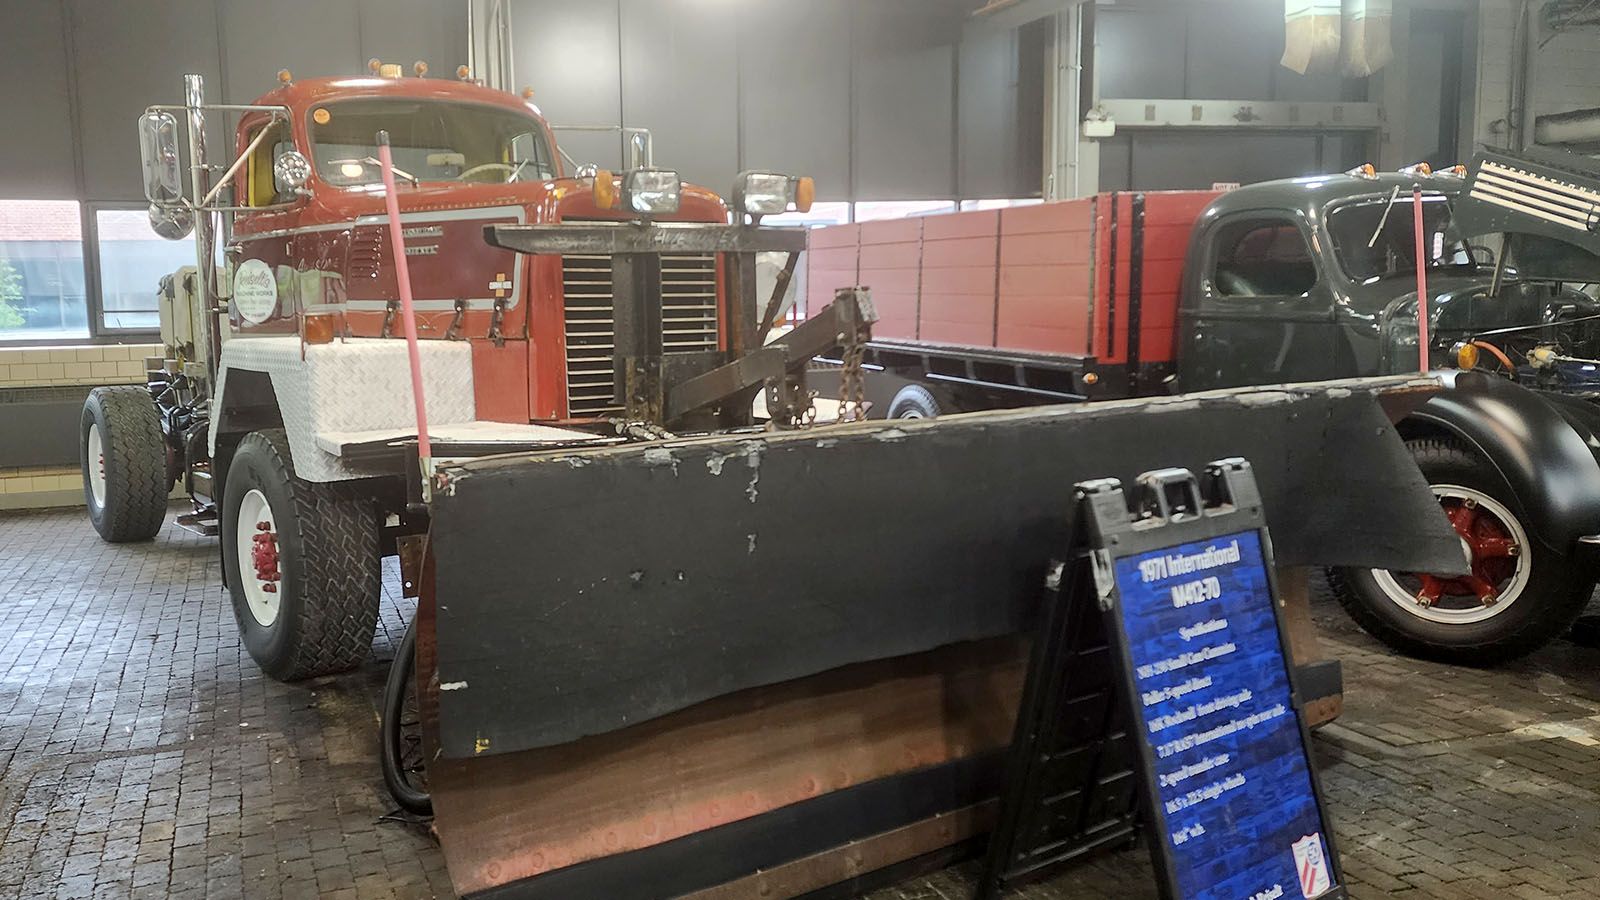 An International Harvester plow that helped clear snow at Fort Wayne International Airport for more than 40 years is among the many vehicles you can check out during Harvester Homecoming, Aug. 4-5.